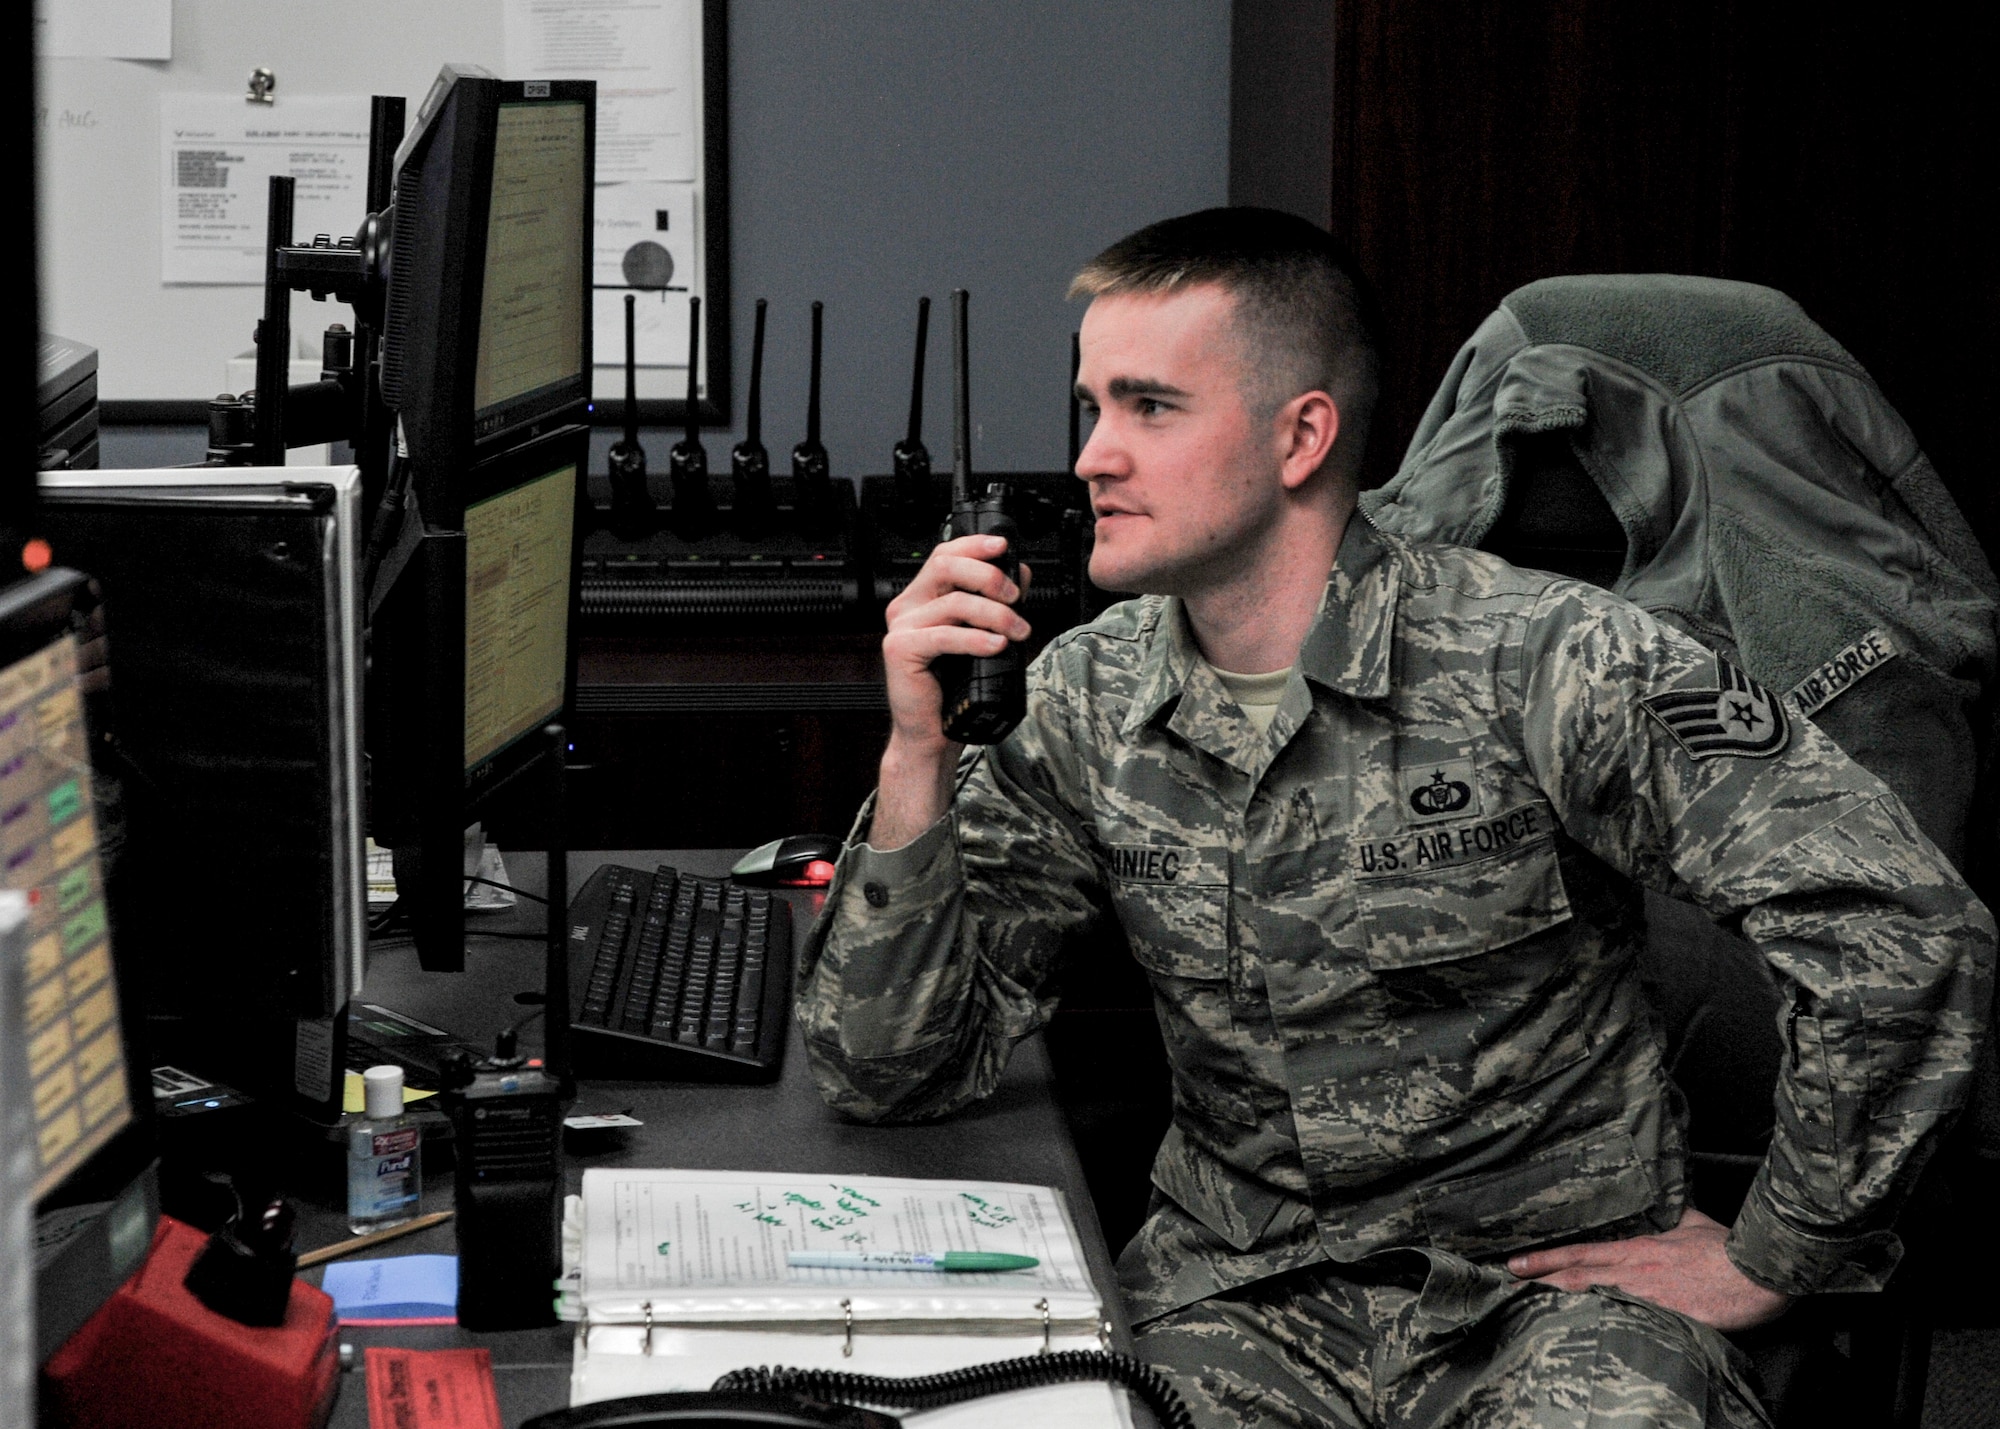 Staff Sgt. Michael Duniec, an operations controller with the 910th Airlift Wing Command Post, coordinates a C-130H Hercules permission to park in a requested space on Youngstown Air Reserve Station’s flightline April 9, 2018. Duniec joined the Air Force Reserve at 17 with a parental wavier, he was inspired by his father’s four years active duty service in the Air Force working on the Titan II Two Missile Silos in peacetime.